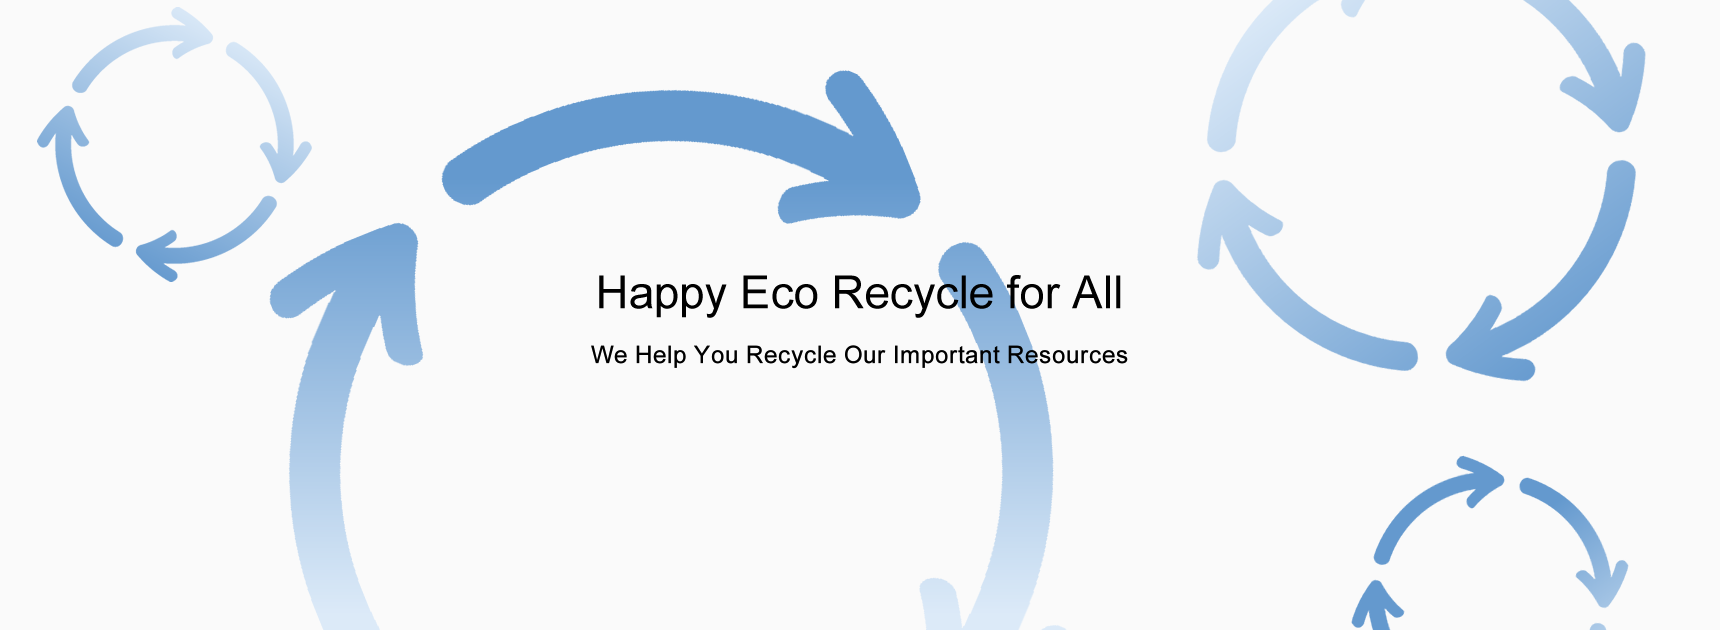 Happy Eco Recycle for All